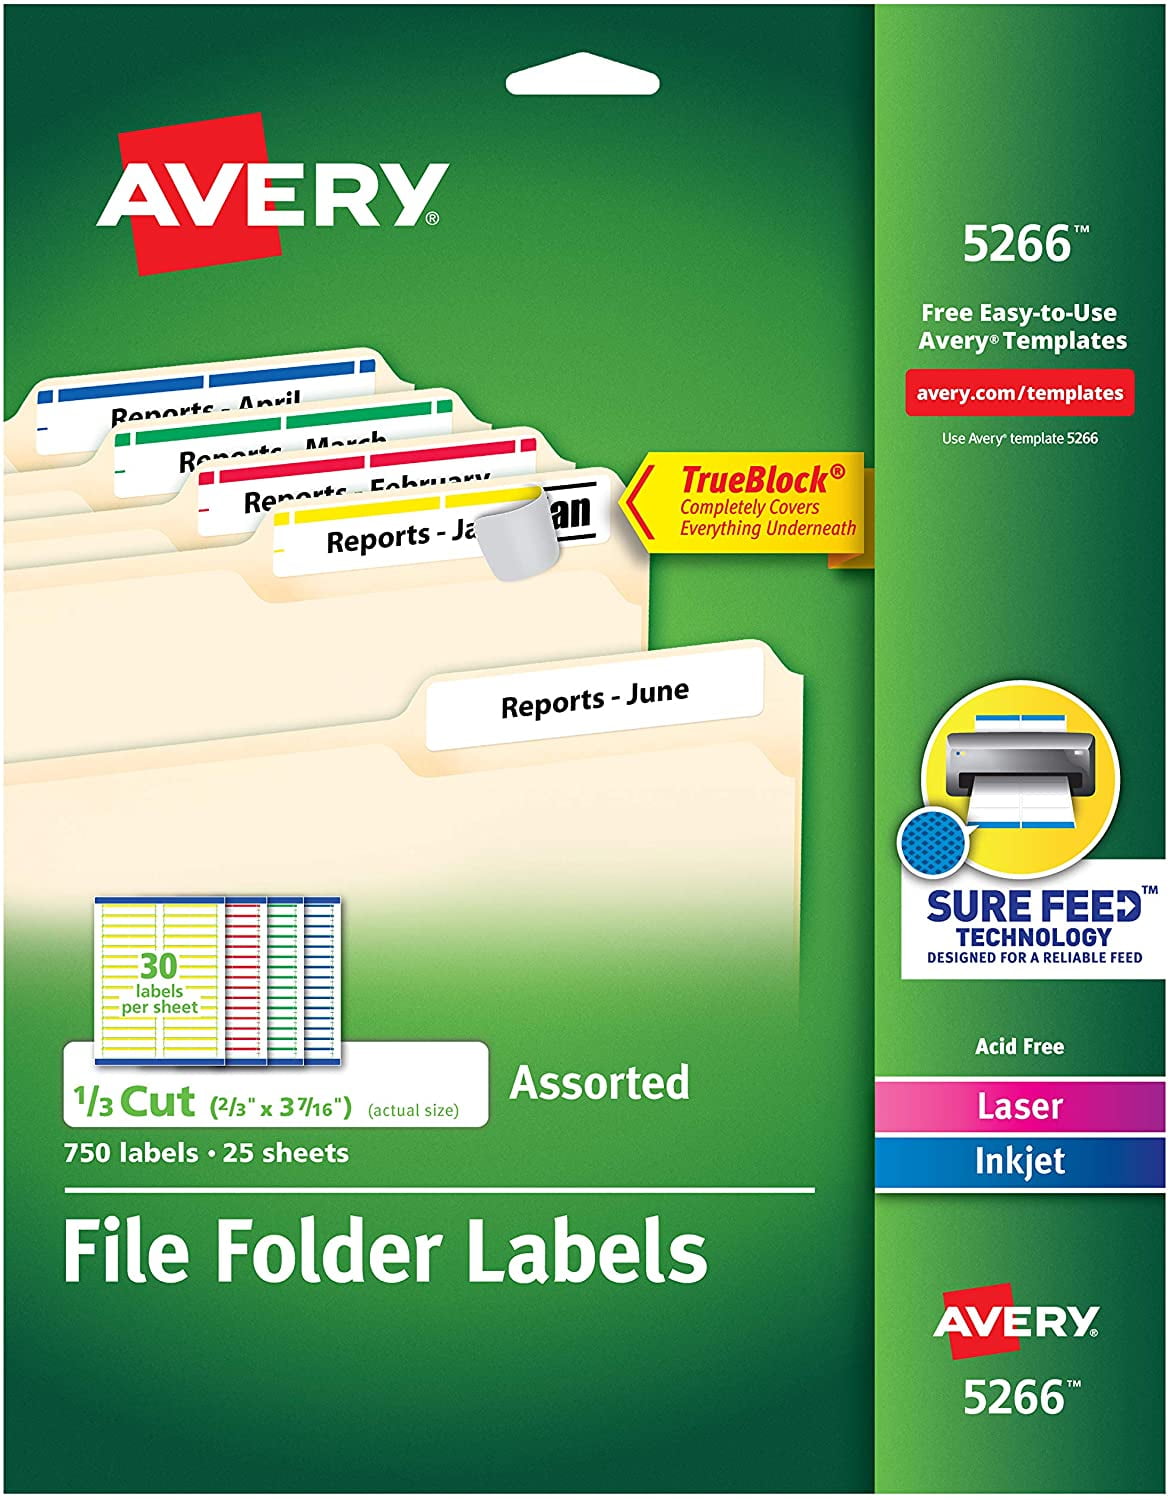 Avery File Folder Labels In Assorted Colors For Laser And Inkjet Printers With TrueBlock 